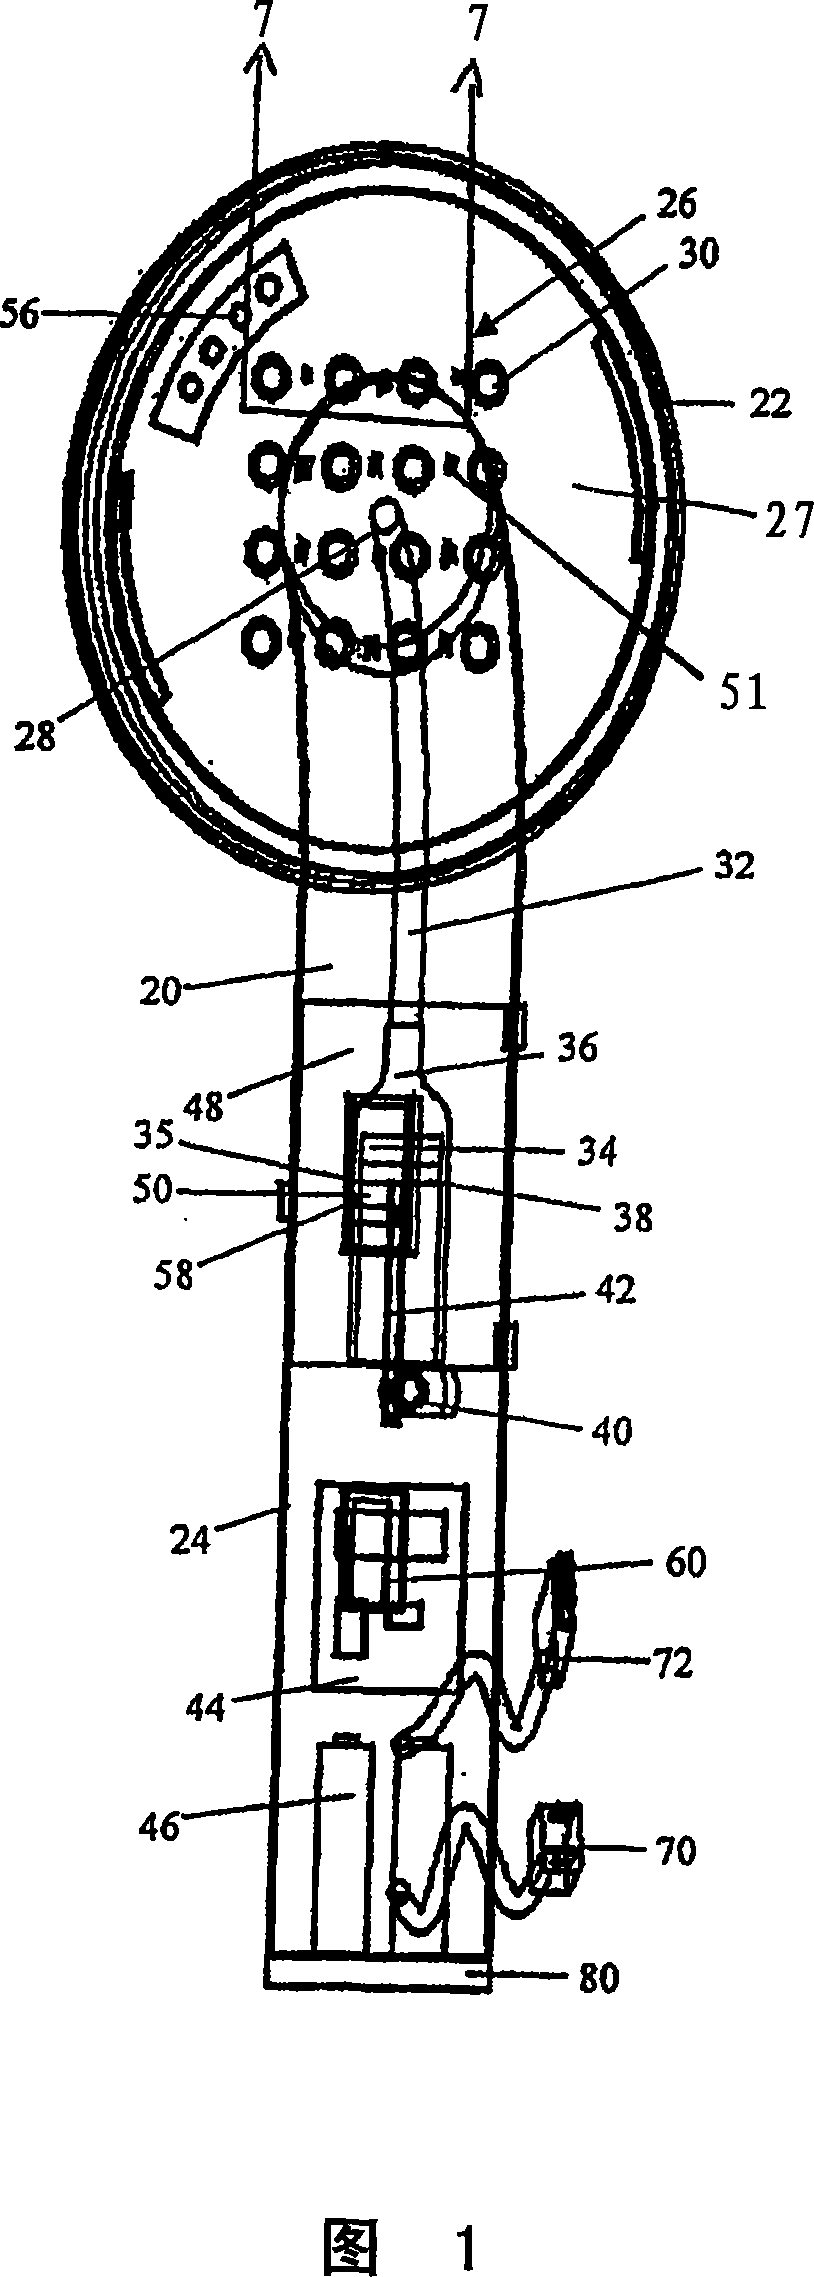 Therapy device and related accessories, compositions, and treatment methods